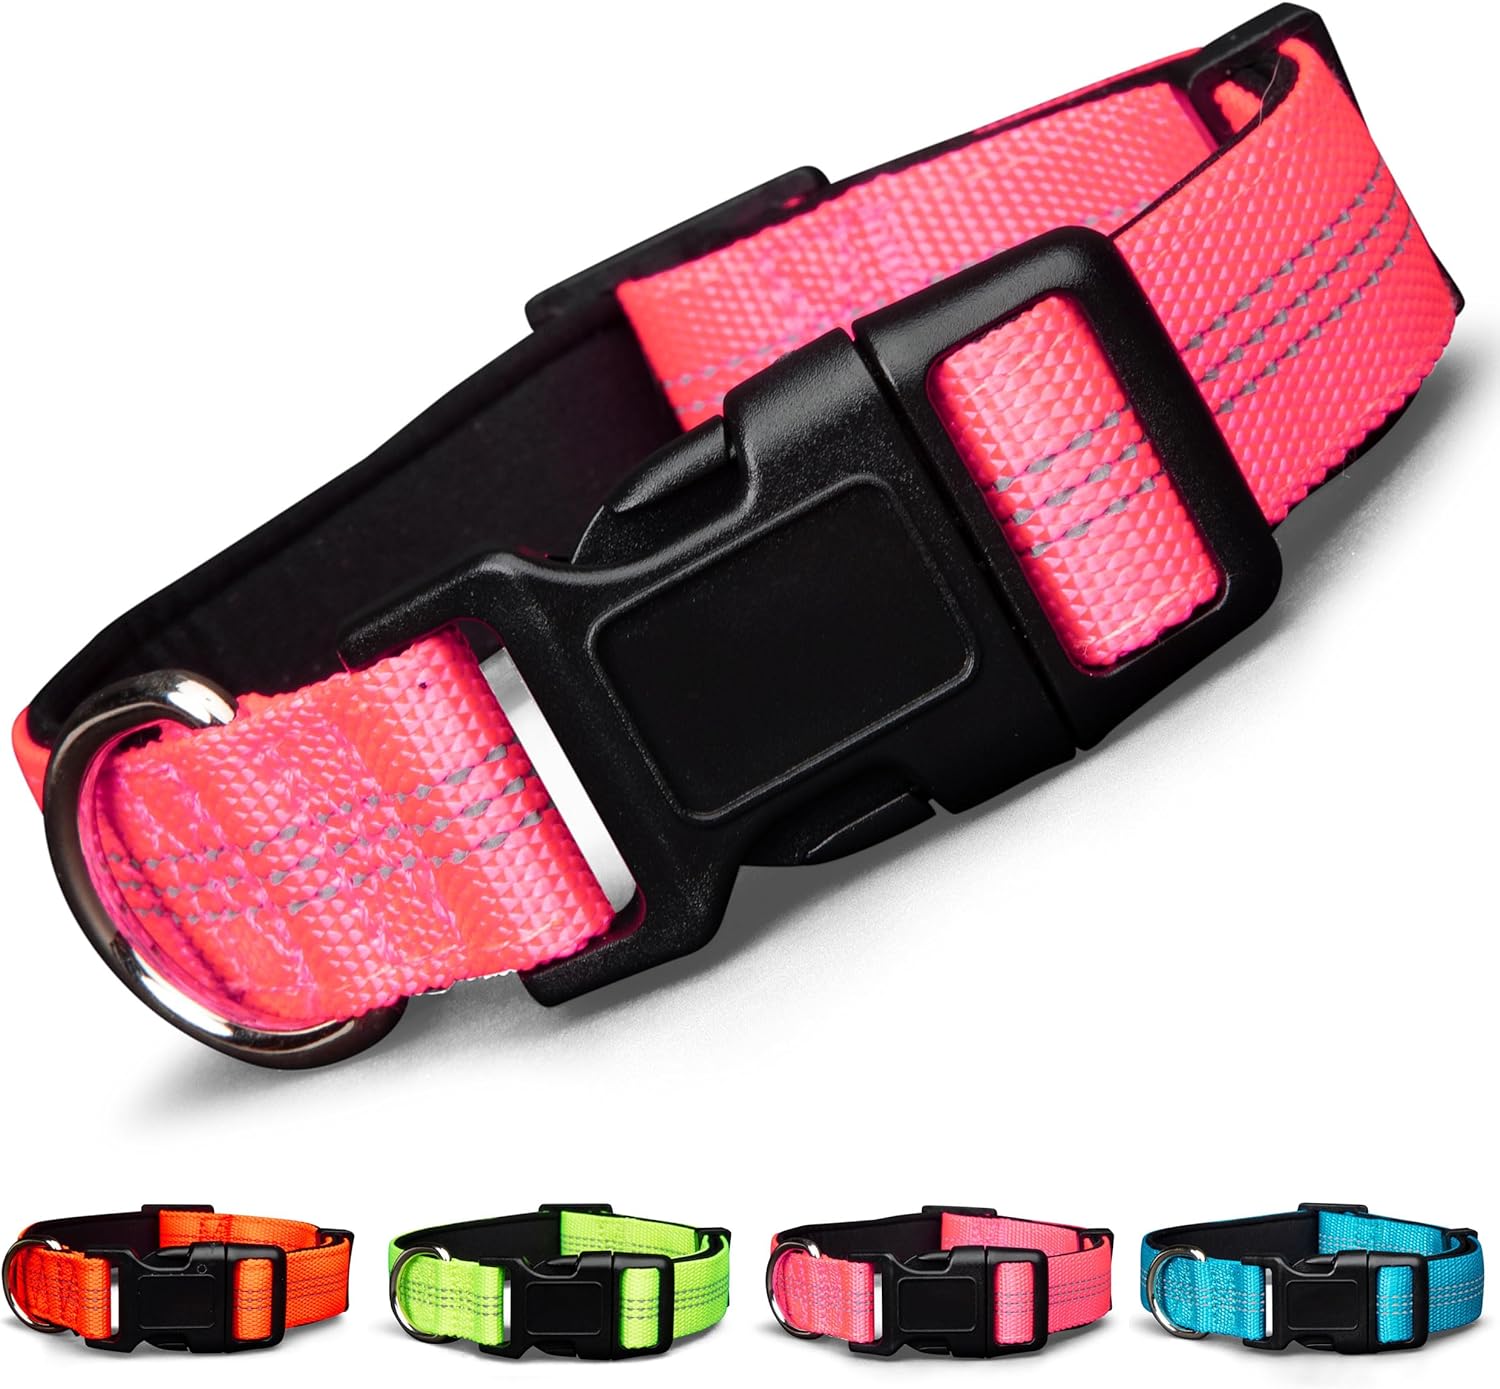 BLAZIN Color Me Happy! Reflective Dog Collar for Day and Night - Adjustable Soft Neoprene Padded Dog Collar in 4 Vibrant Colors - Keeps Dogs Safe and Stylish - for Every Day Use (Large, Orange)